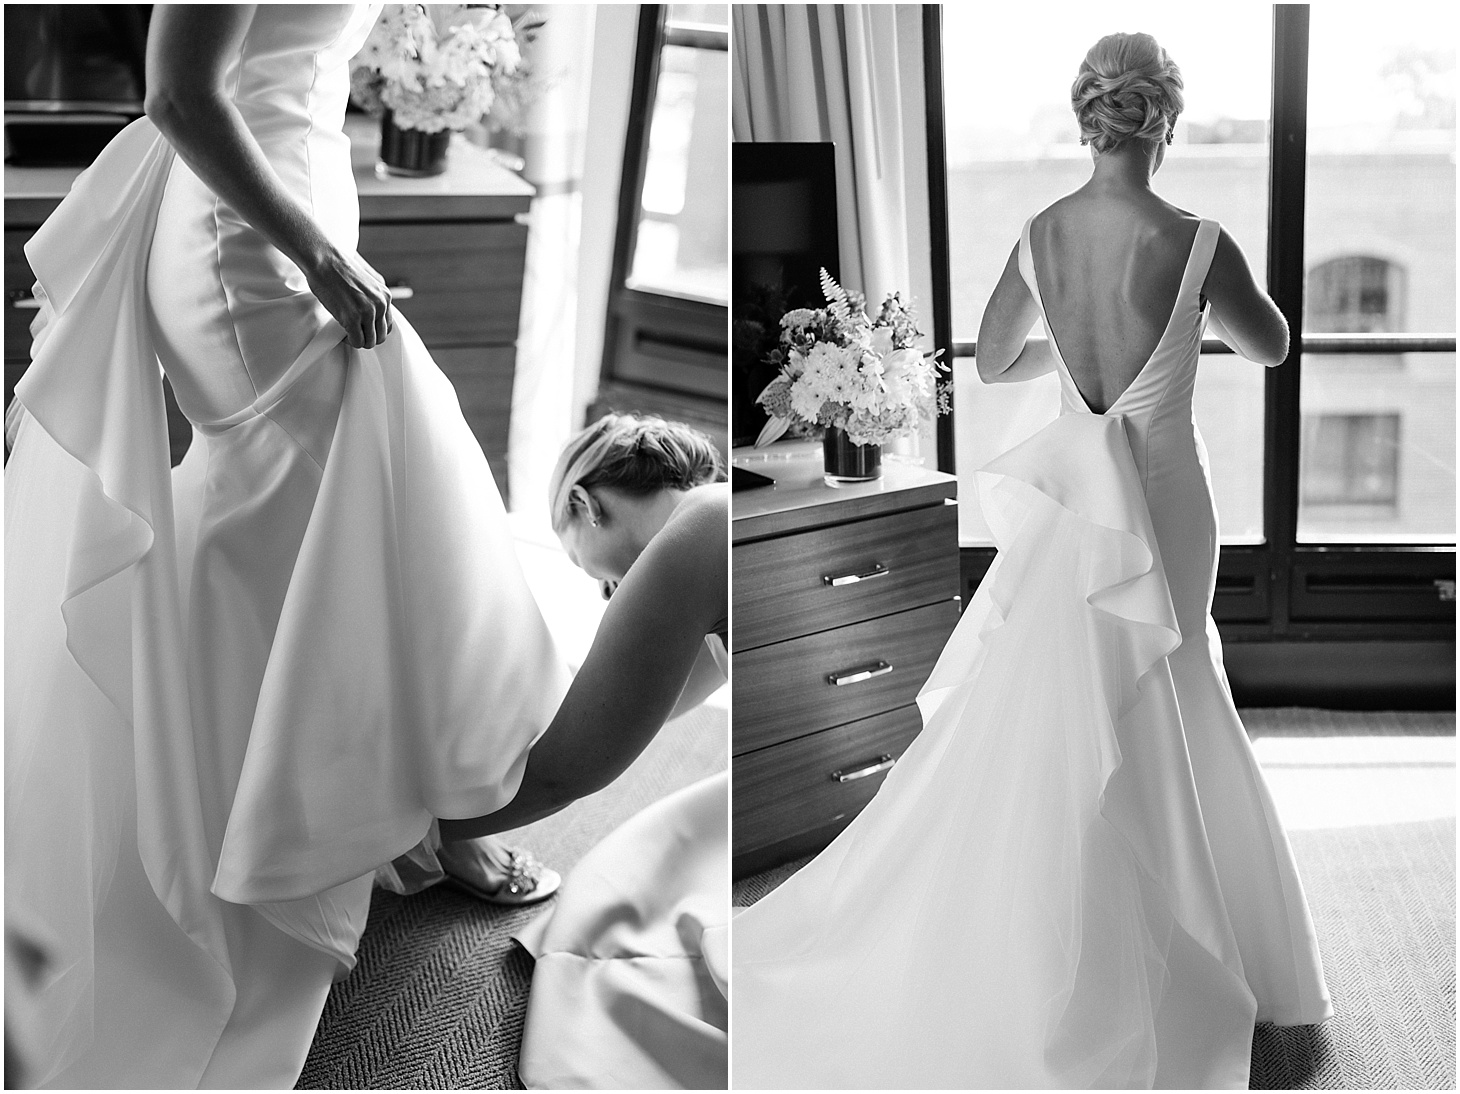 Bride Getting Ready at Loew's Hotel | Southern Magnolia Wedding at the Naval Academy and Gibson Island Club | Sarah Bradshaw Photography